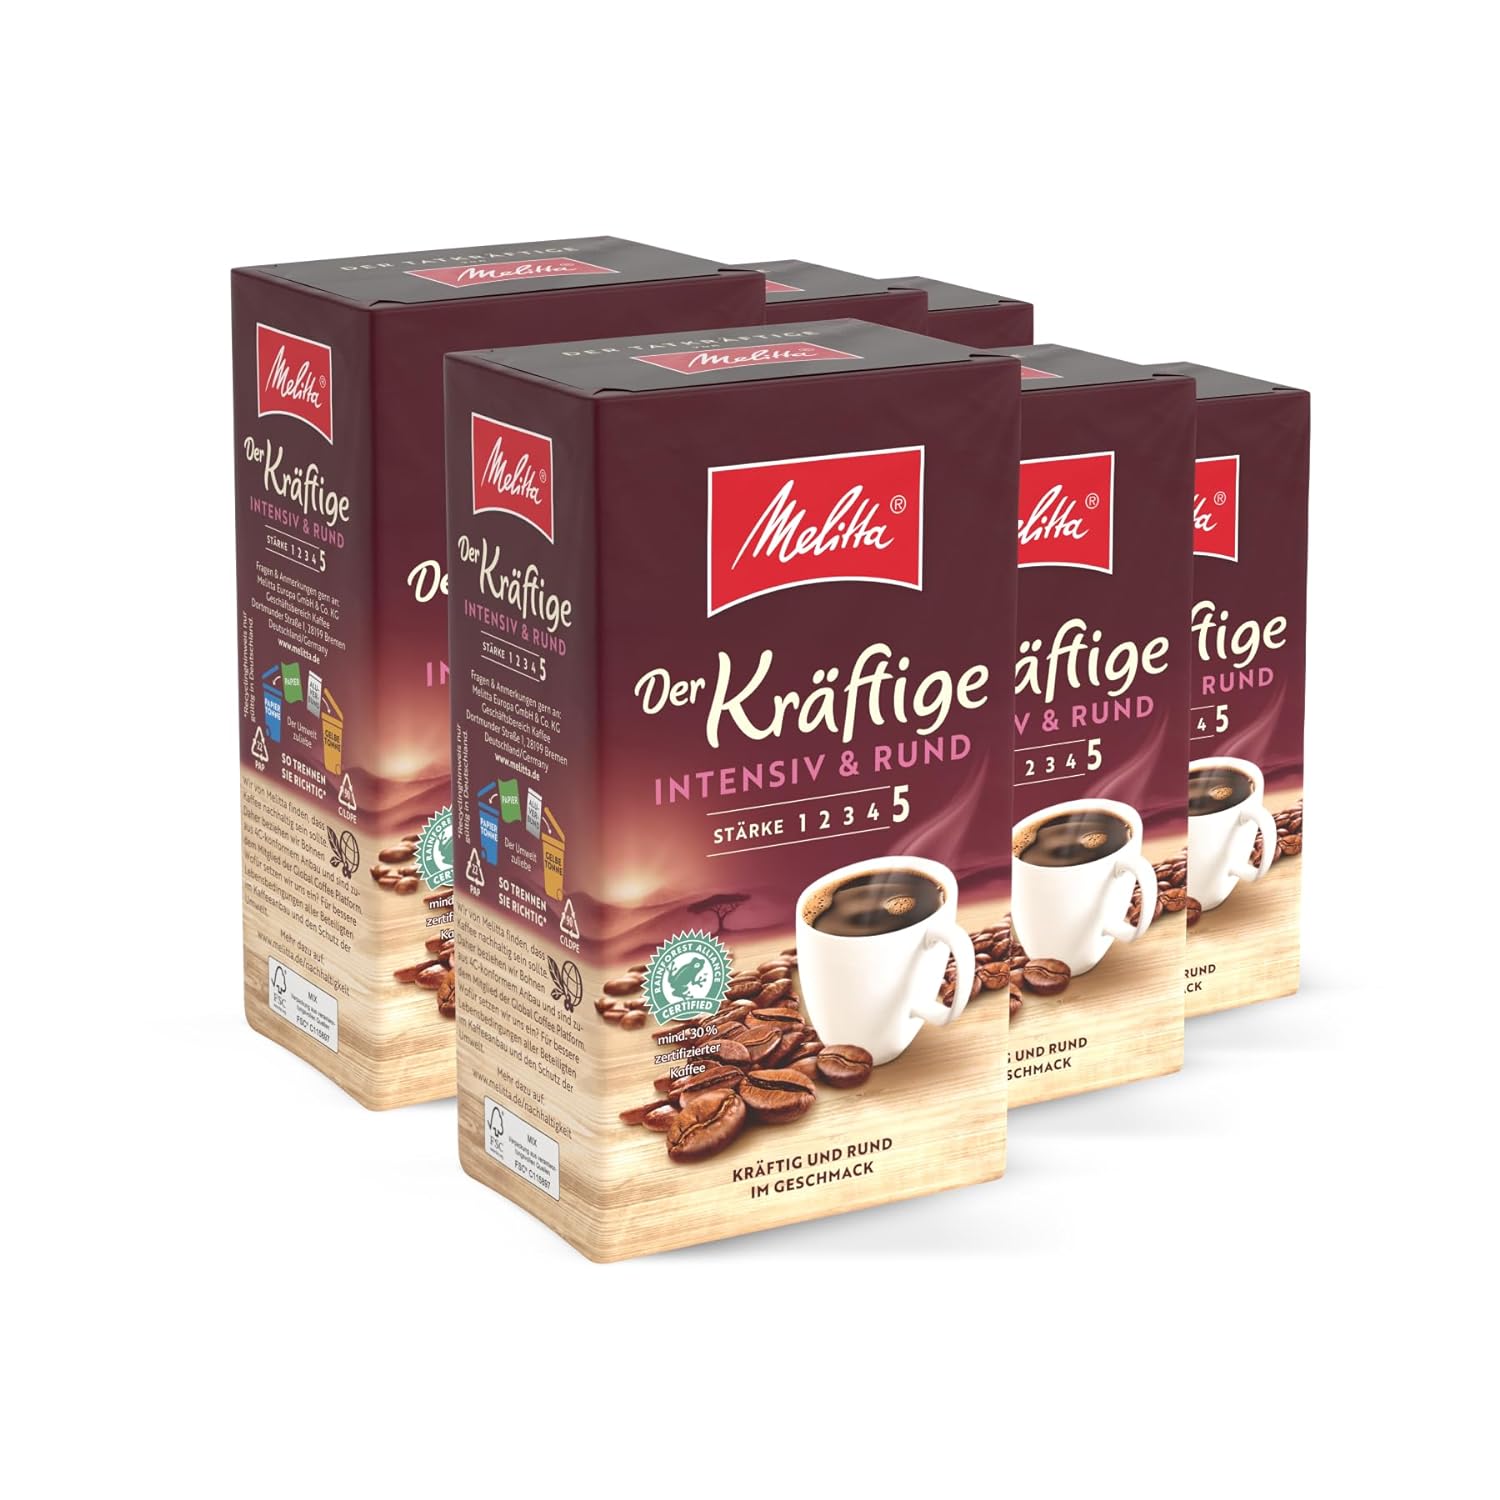 Melitta The Powerful Filter Coffee 6 x 500 g, Ground, Powder for Filter Coffee Machines, Strong Roasting, Roasted in Germany, in Tray